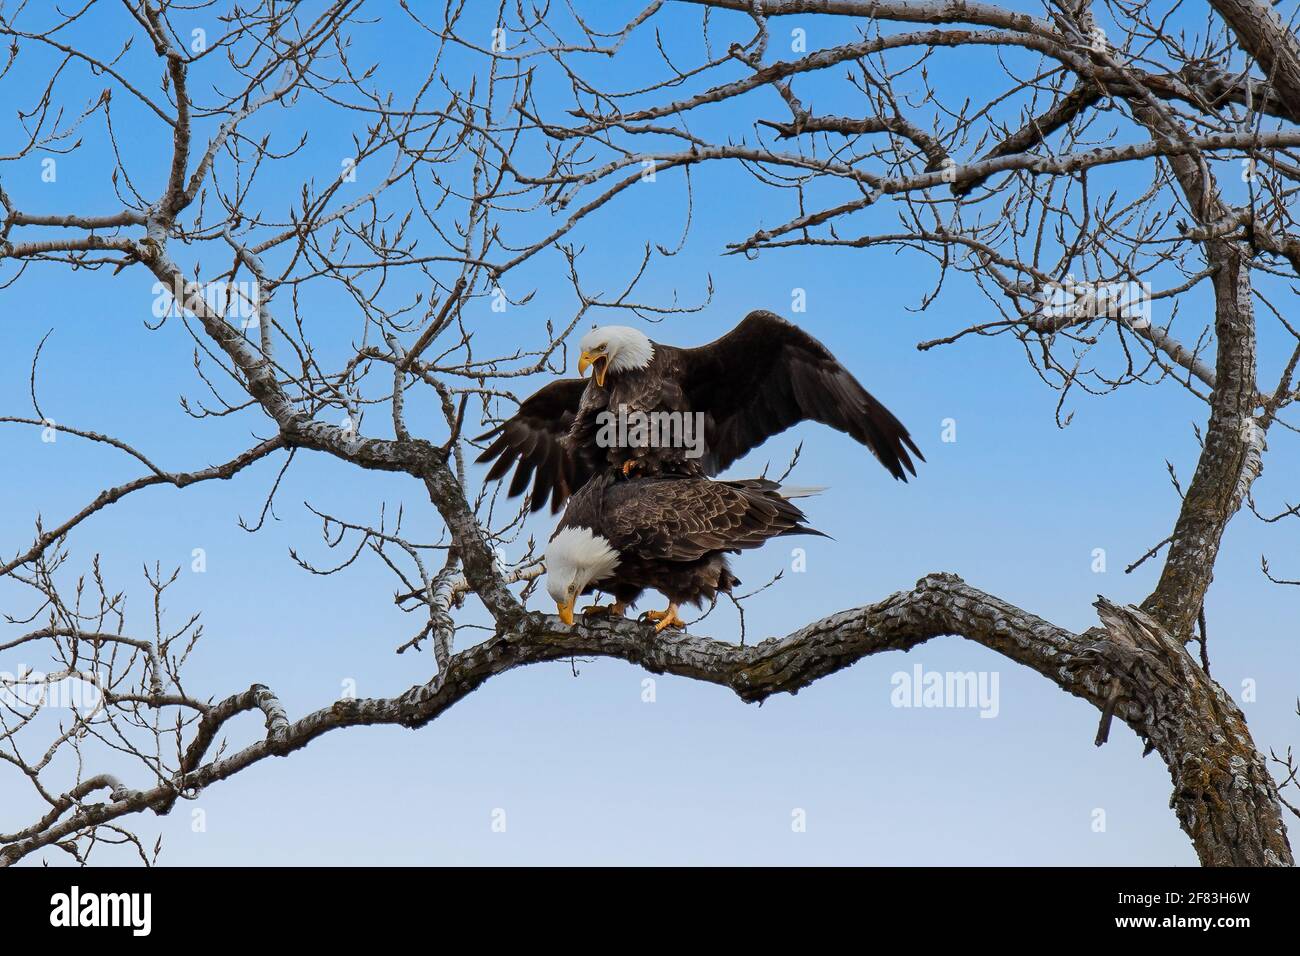 A pair of bald eagles mating on the branch of a tree. Stock Photo